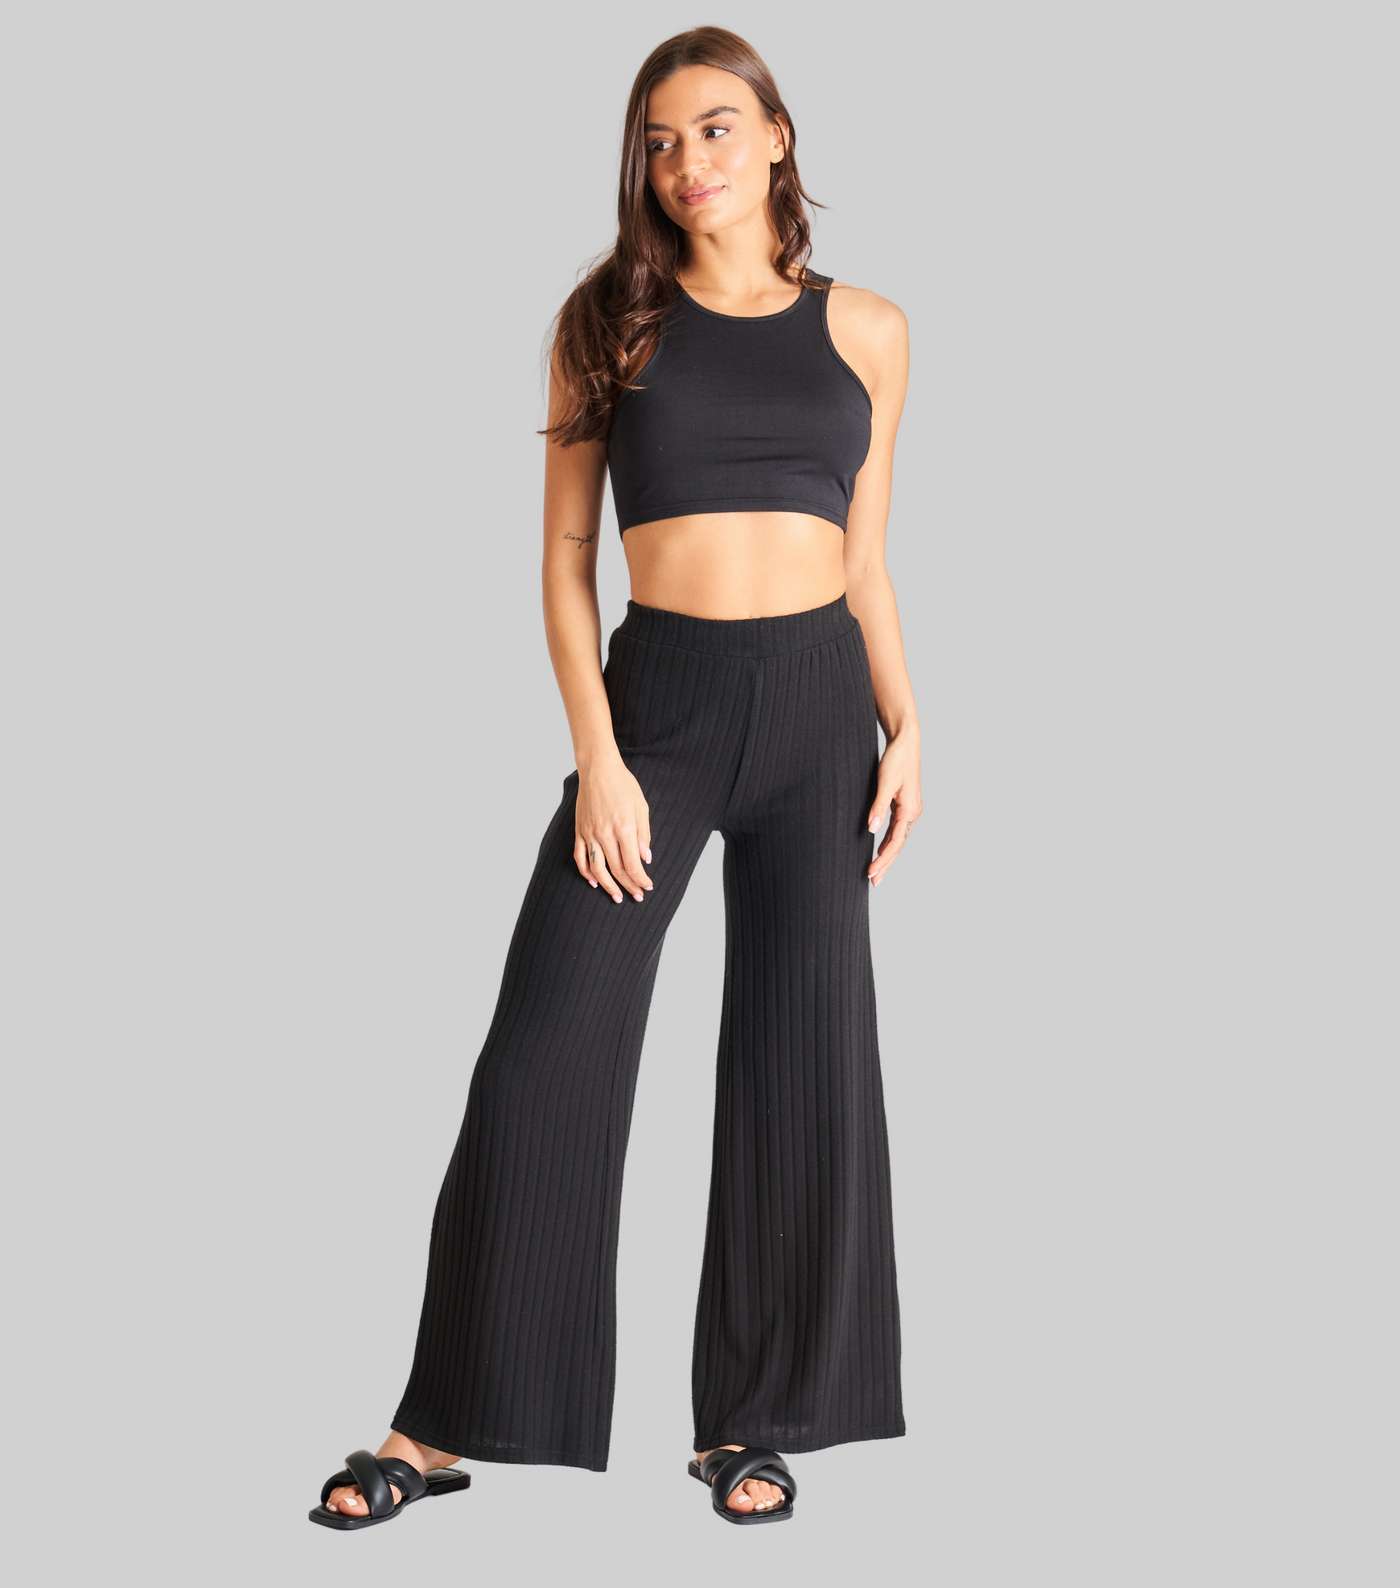 South Beach Black Ribbed Knit High Waist Wide Leg Trousers Image 3